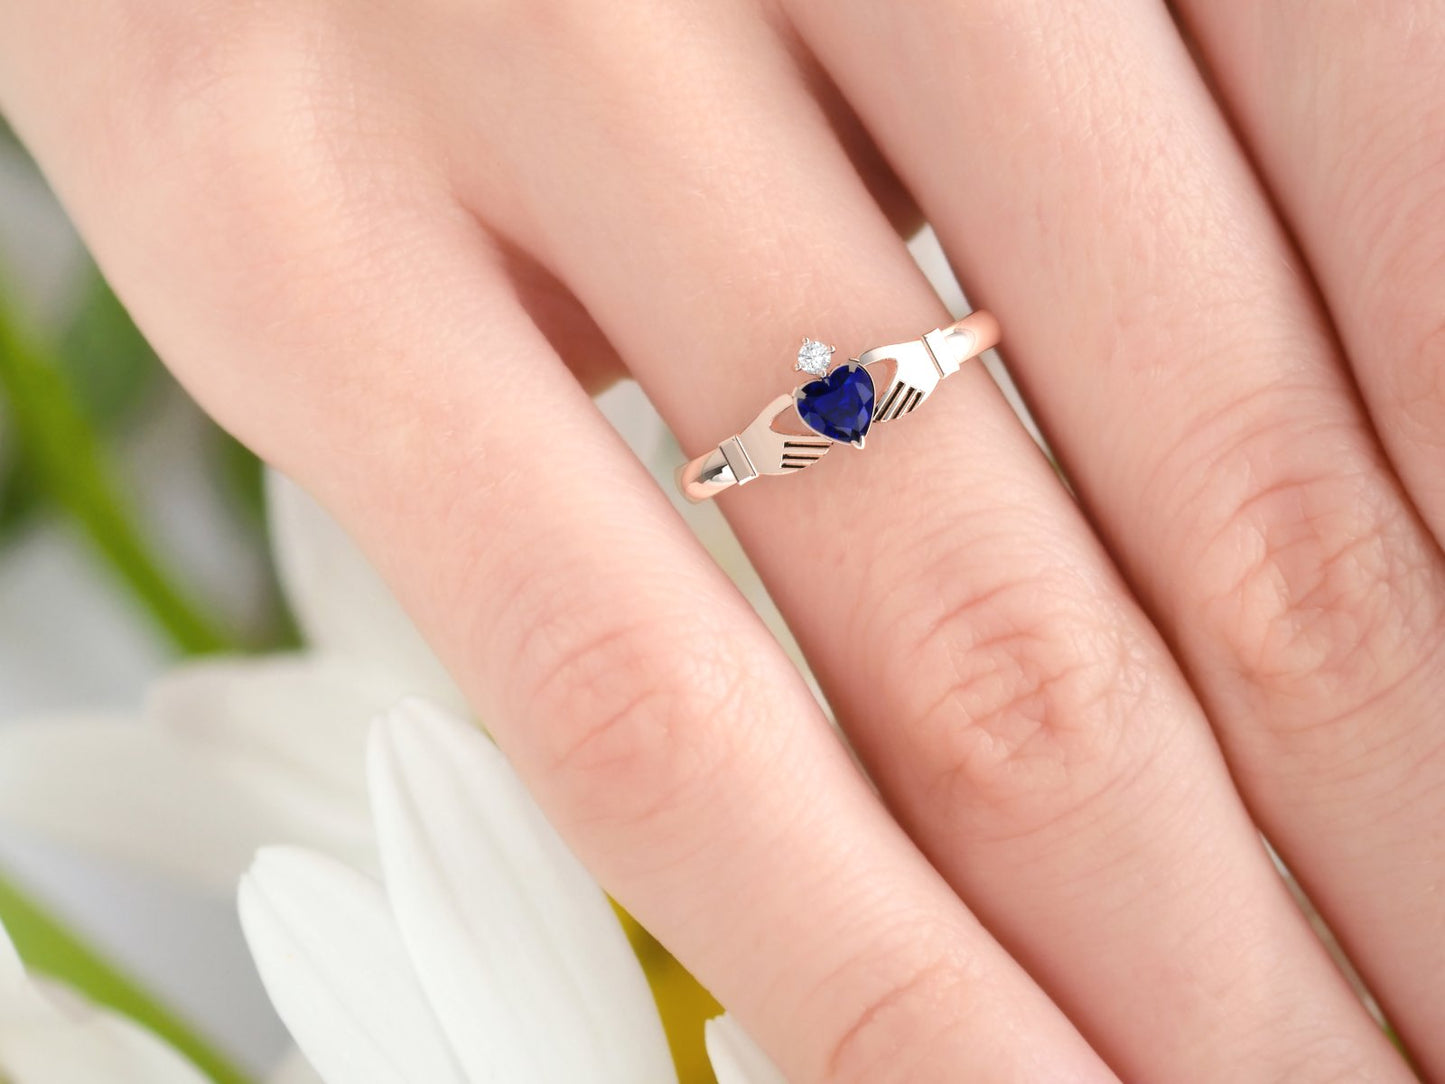 Sapphire and diamond gold claddagh ring